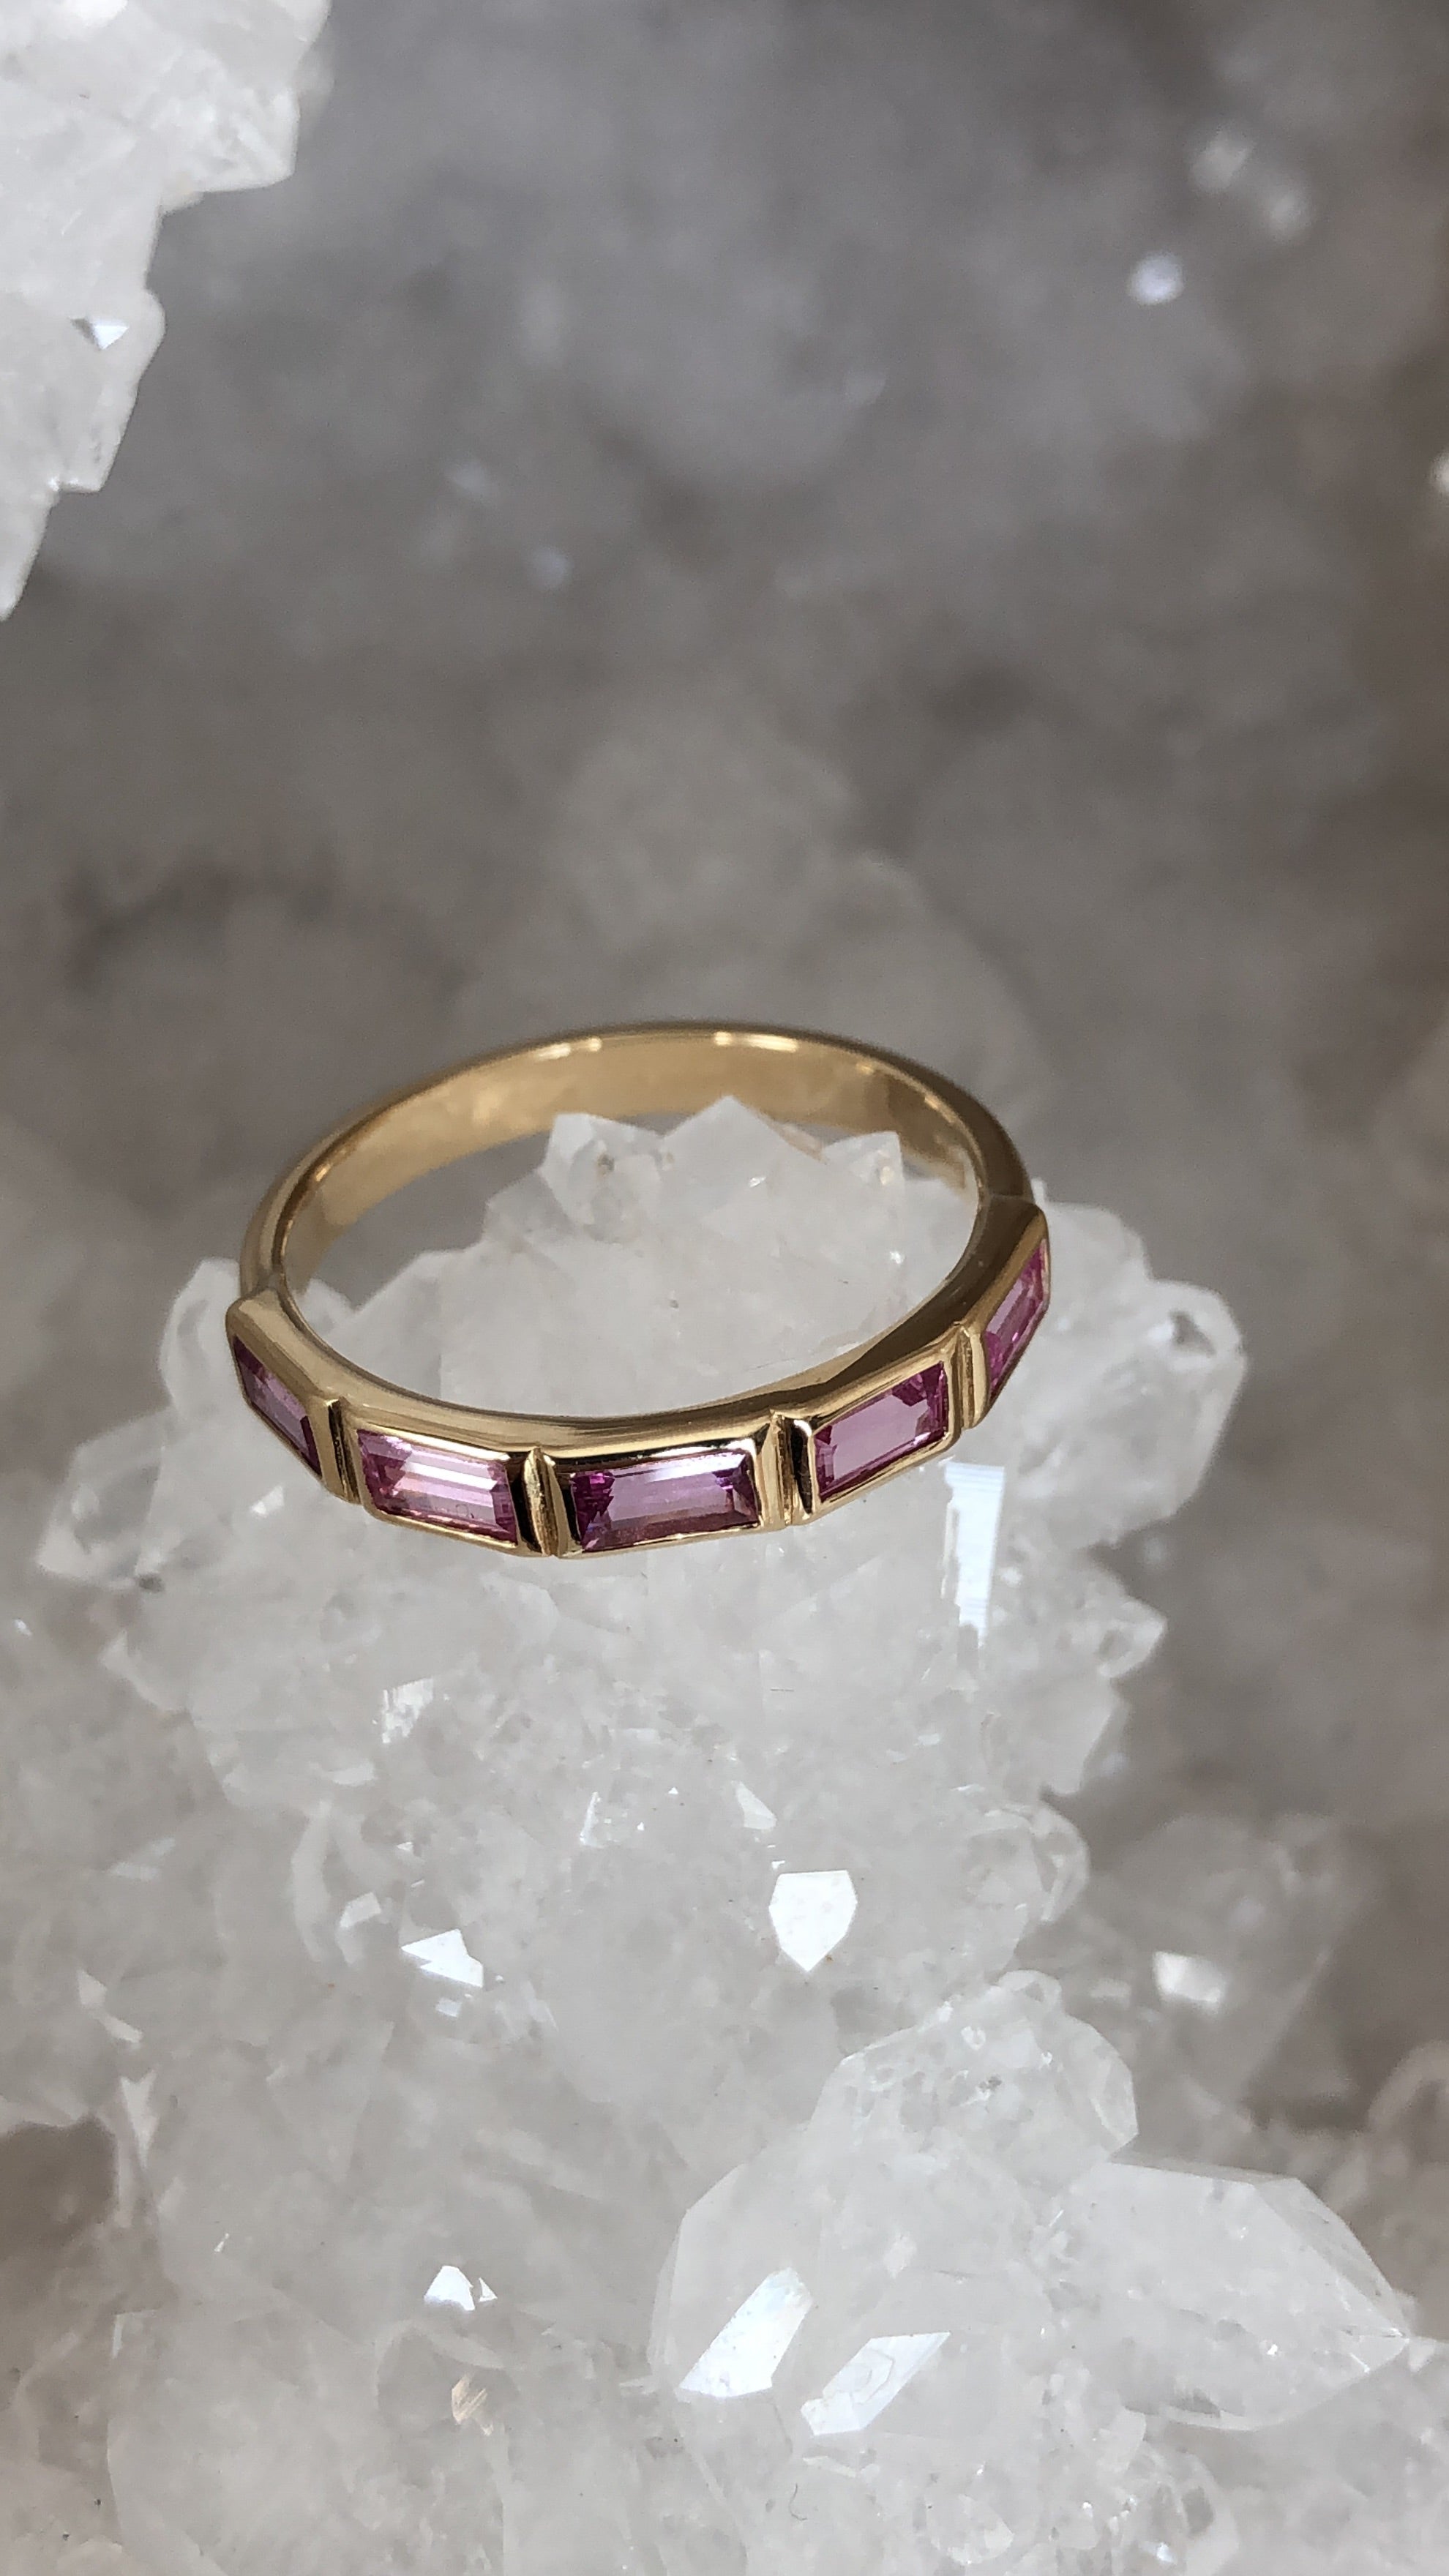 Ring - Sapphire .71 CTW Pink Baguette Cut in 14k Yellow Gold